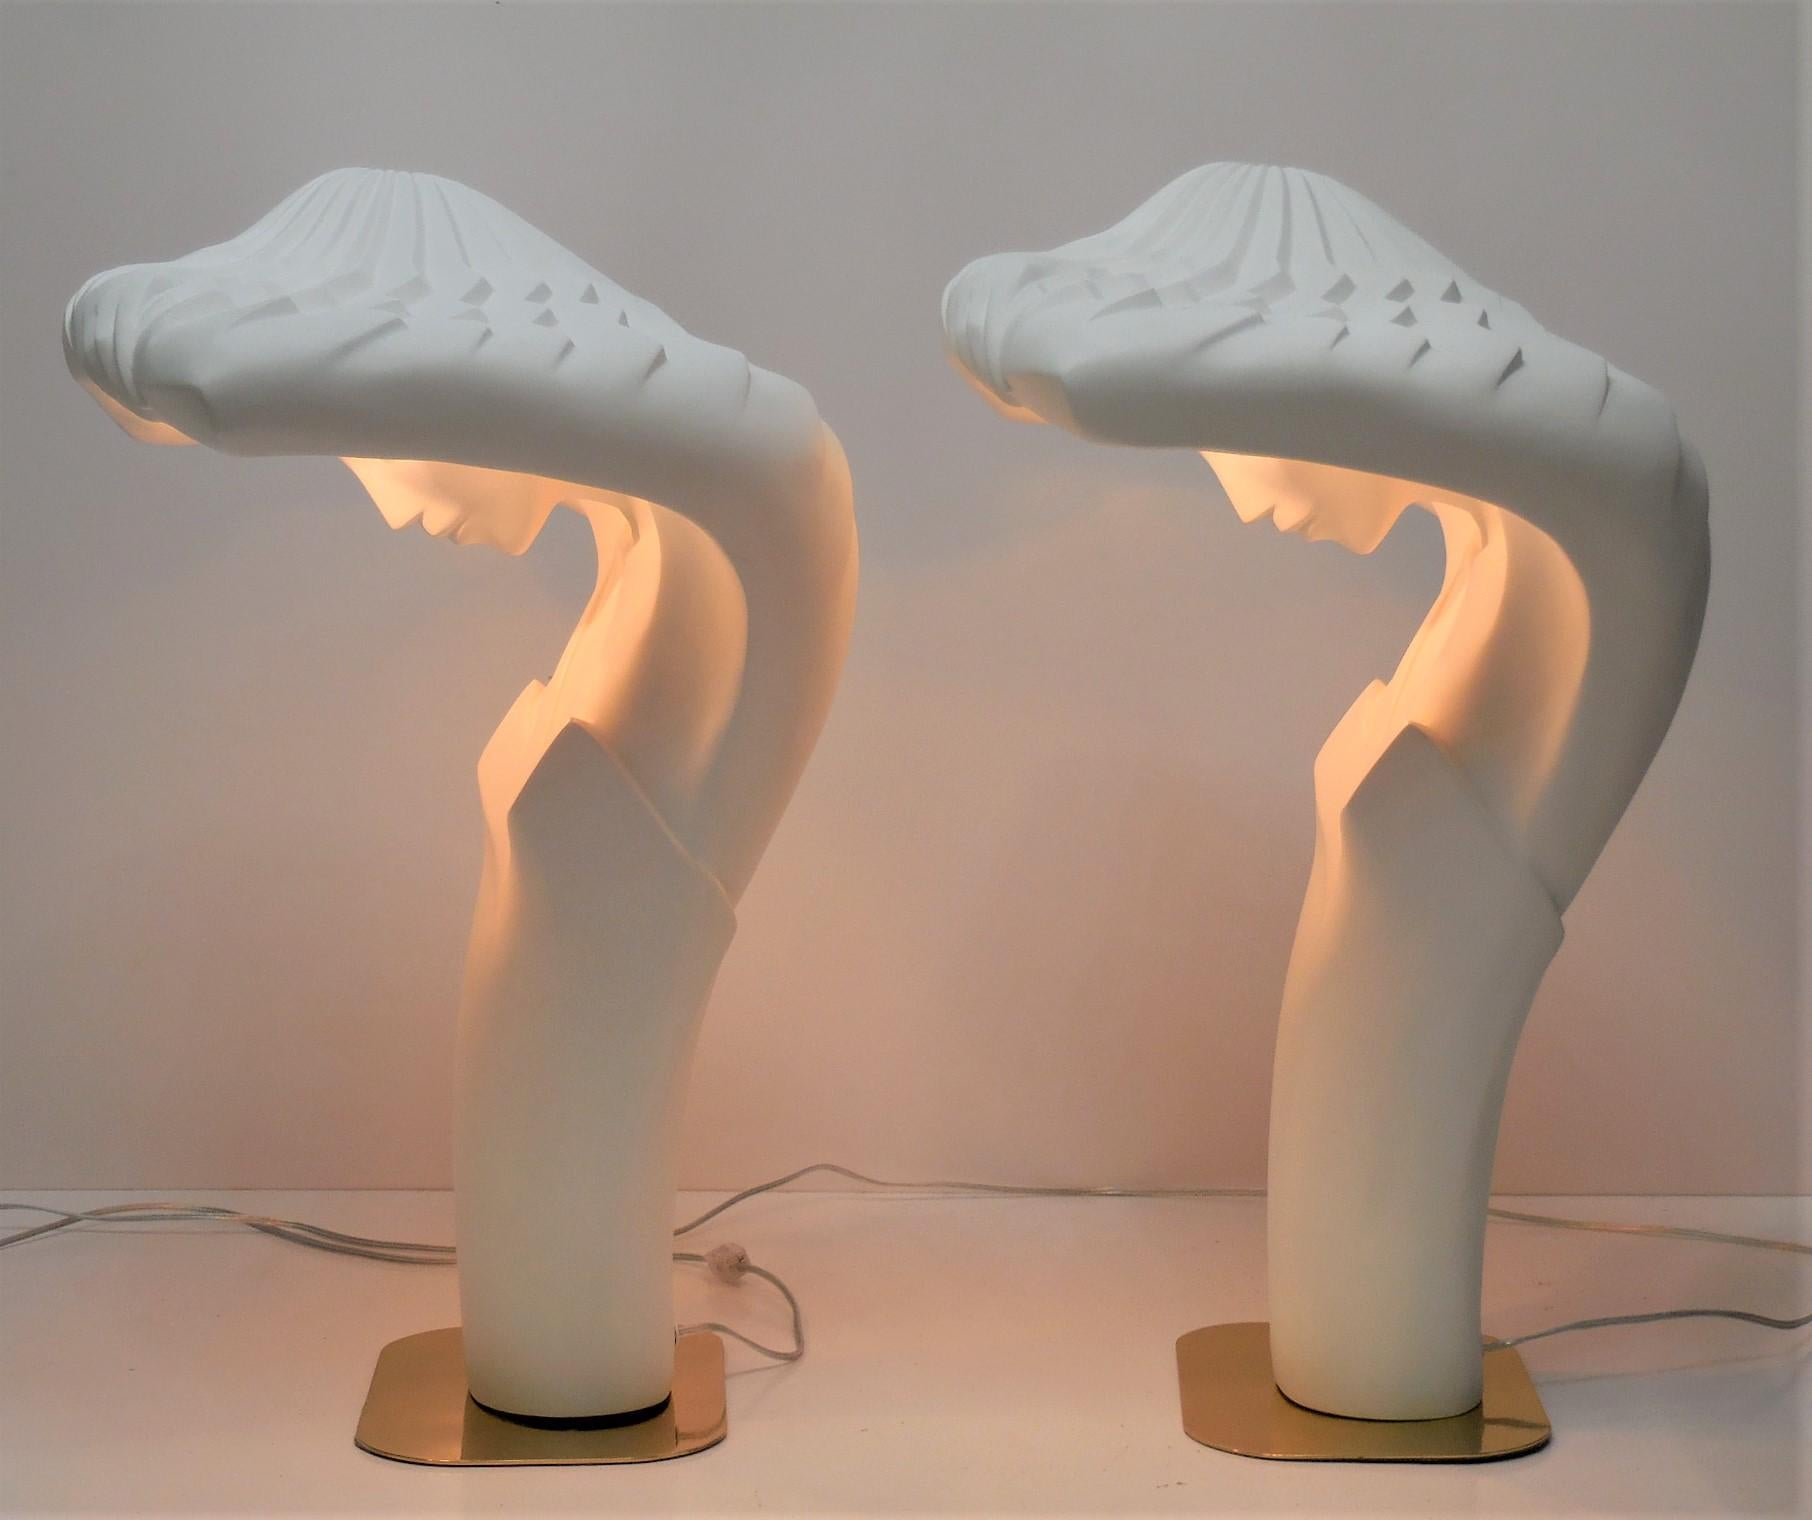 This is a pair of large sculptural lamps by Linsey Balkweill. Each lamp measures 28